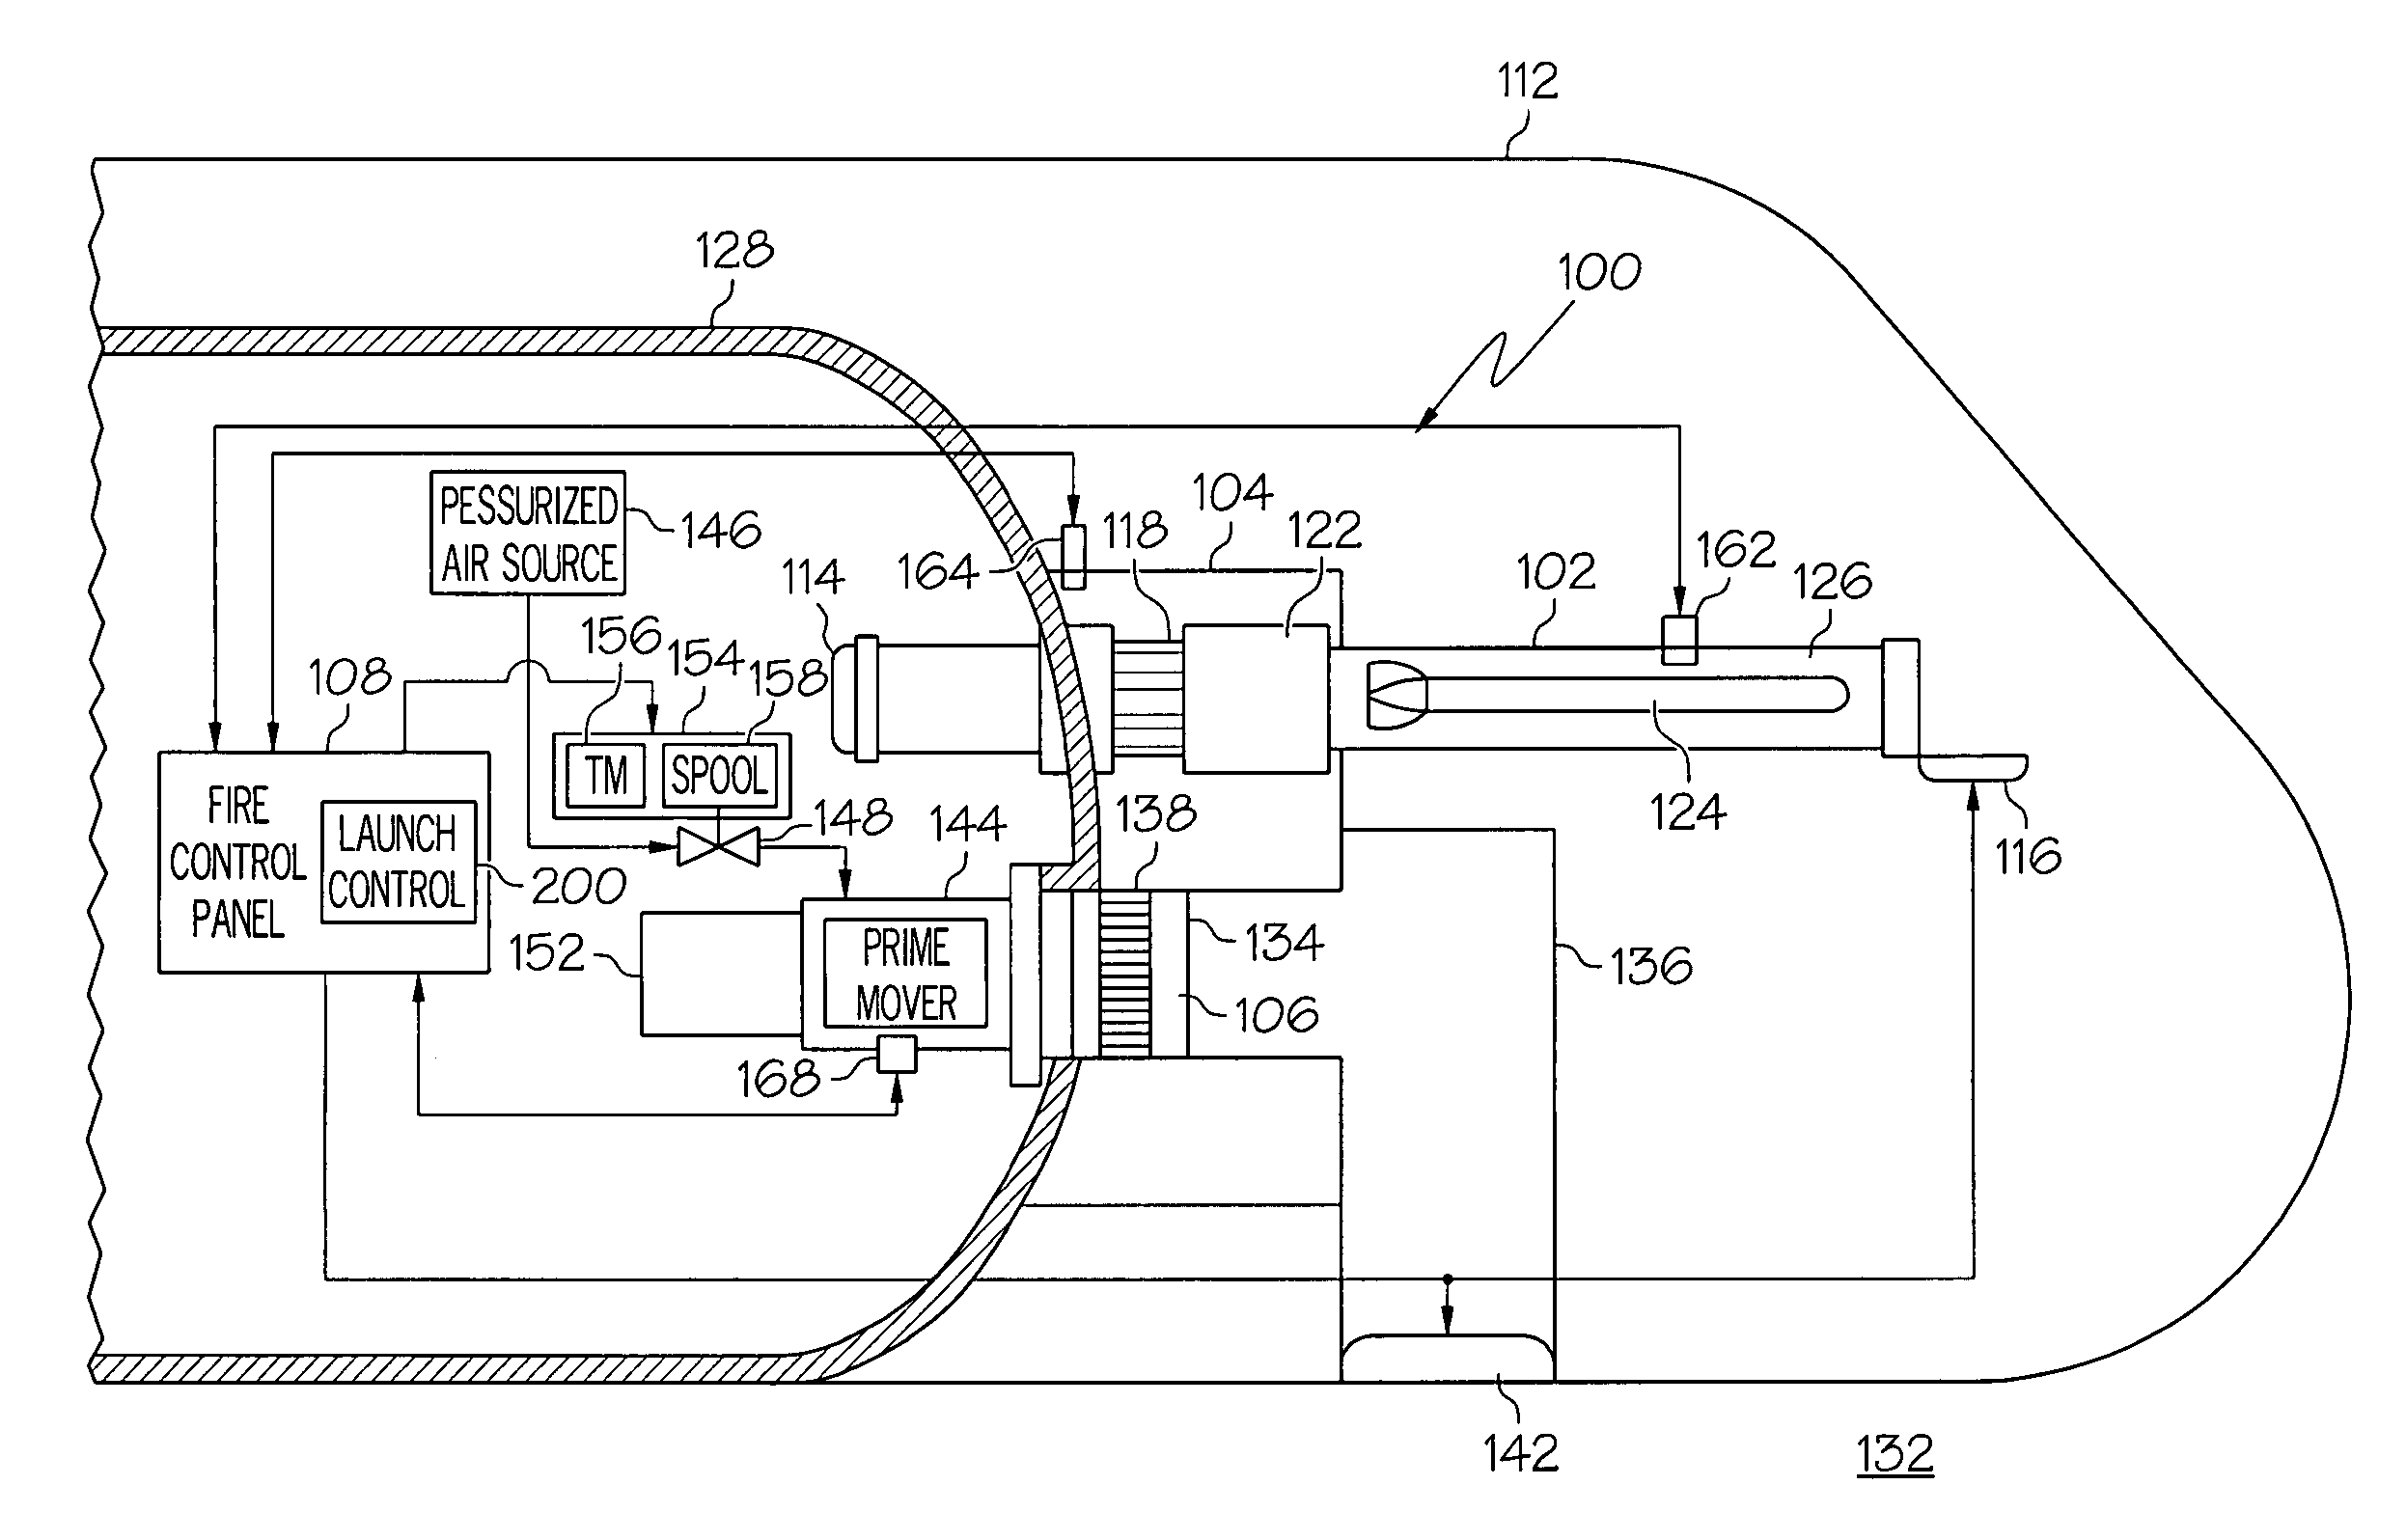 Submarine ejection optimization control system and method